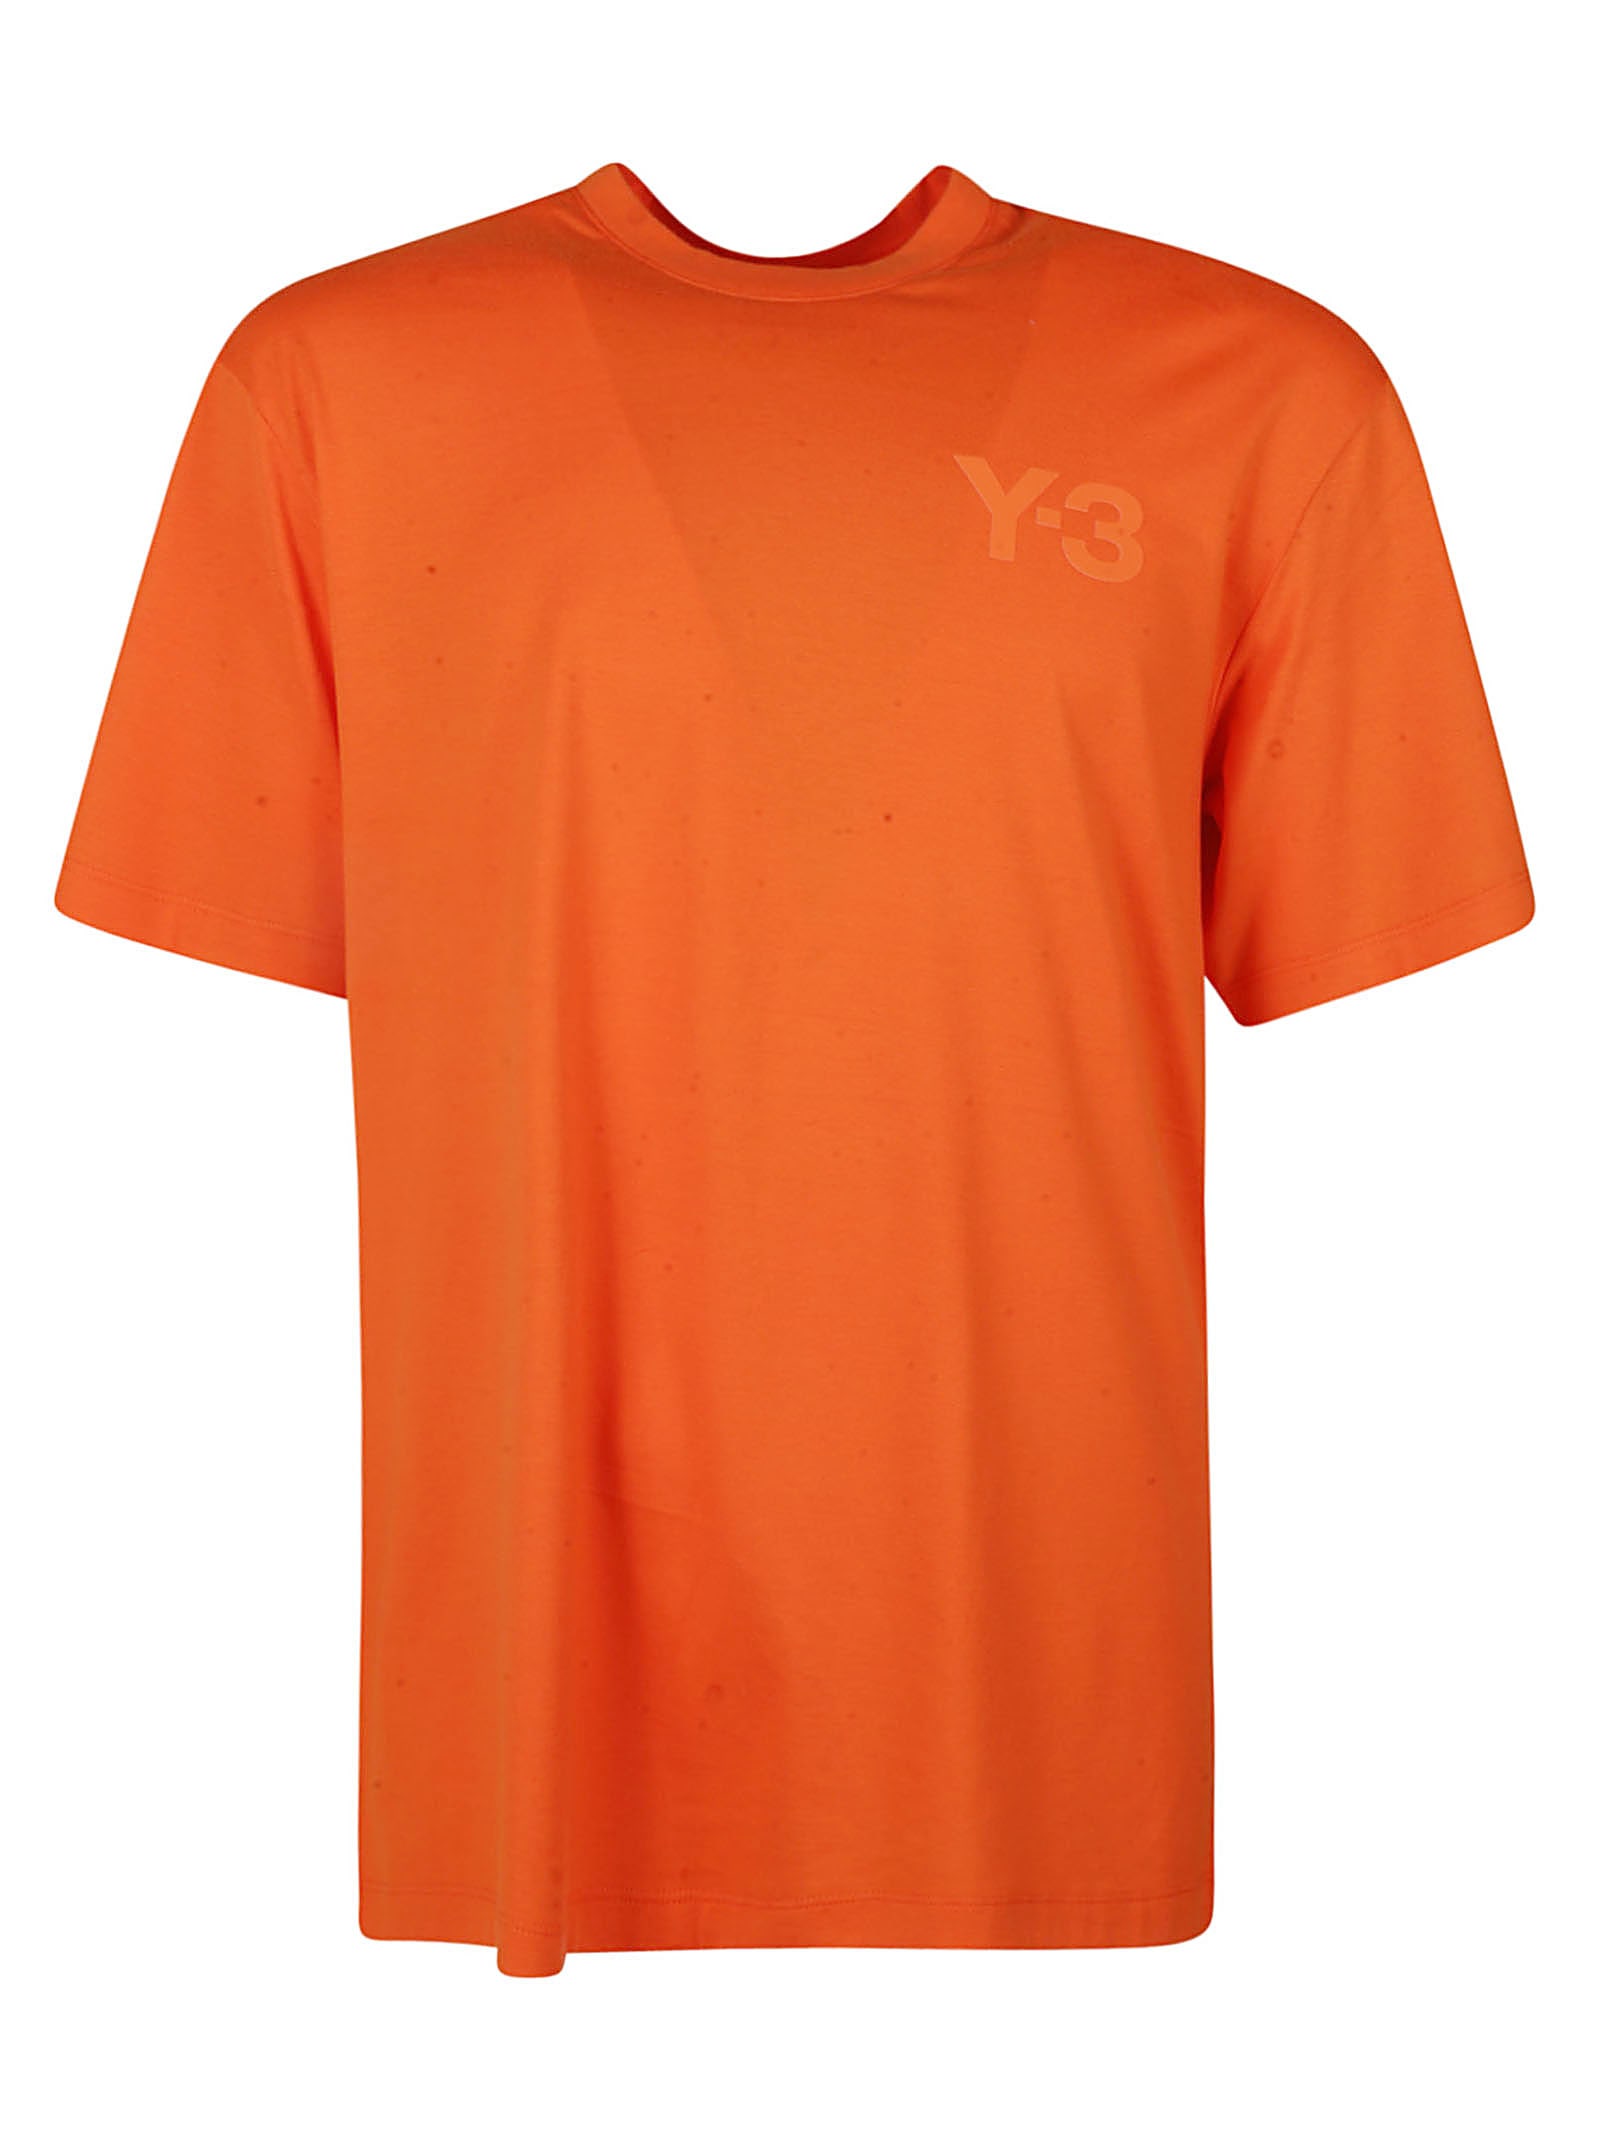 Y-3 M CH1 OPTIMISTIC ILLUSIONS SS TEE